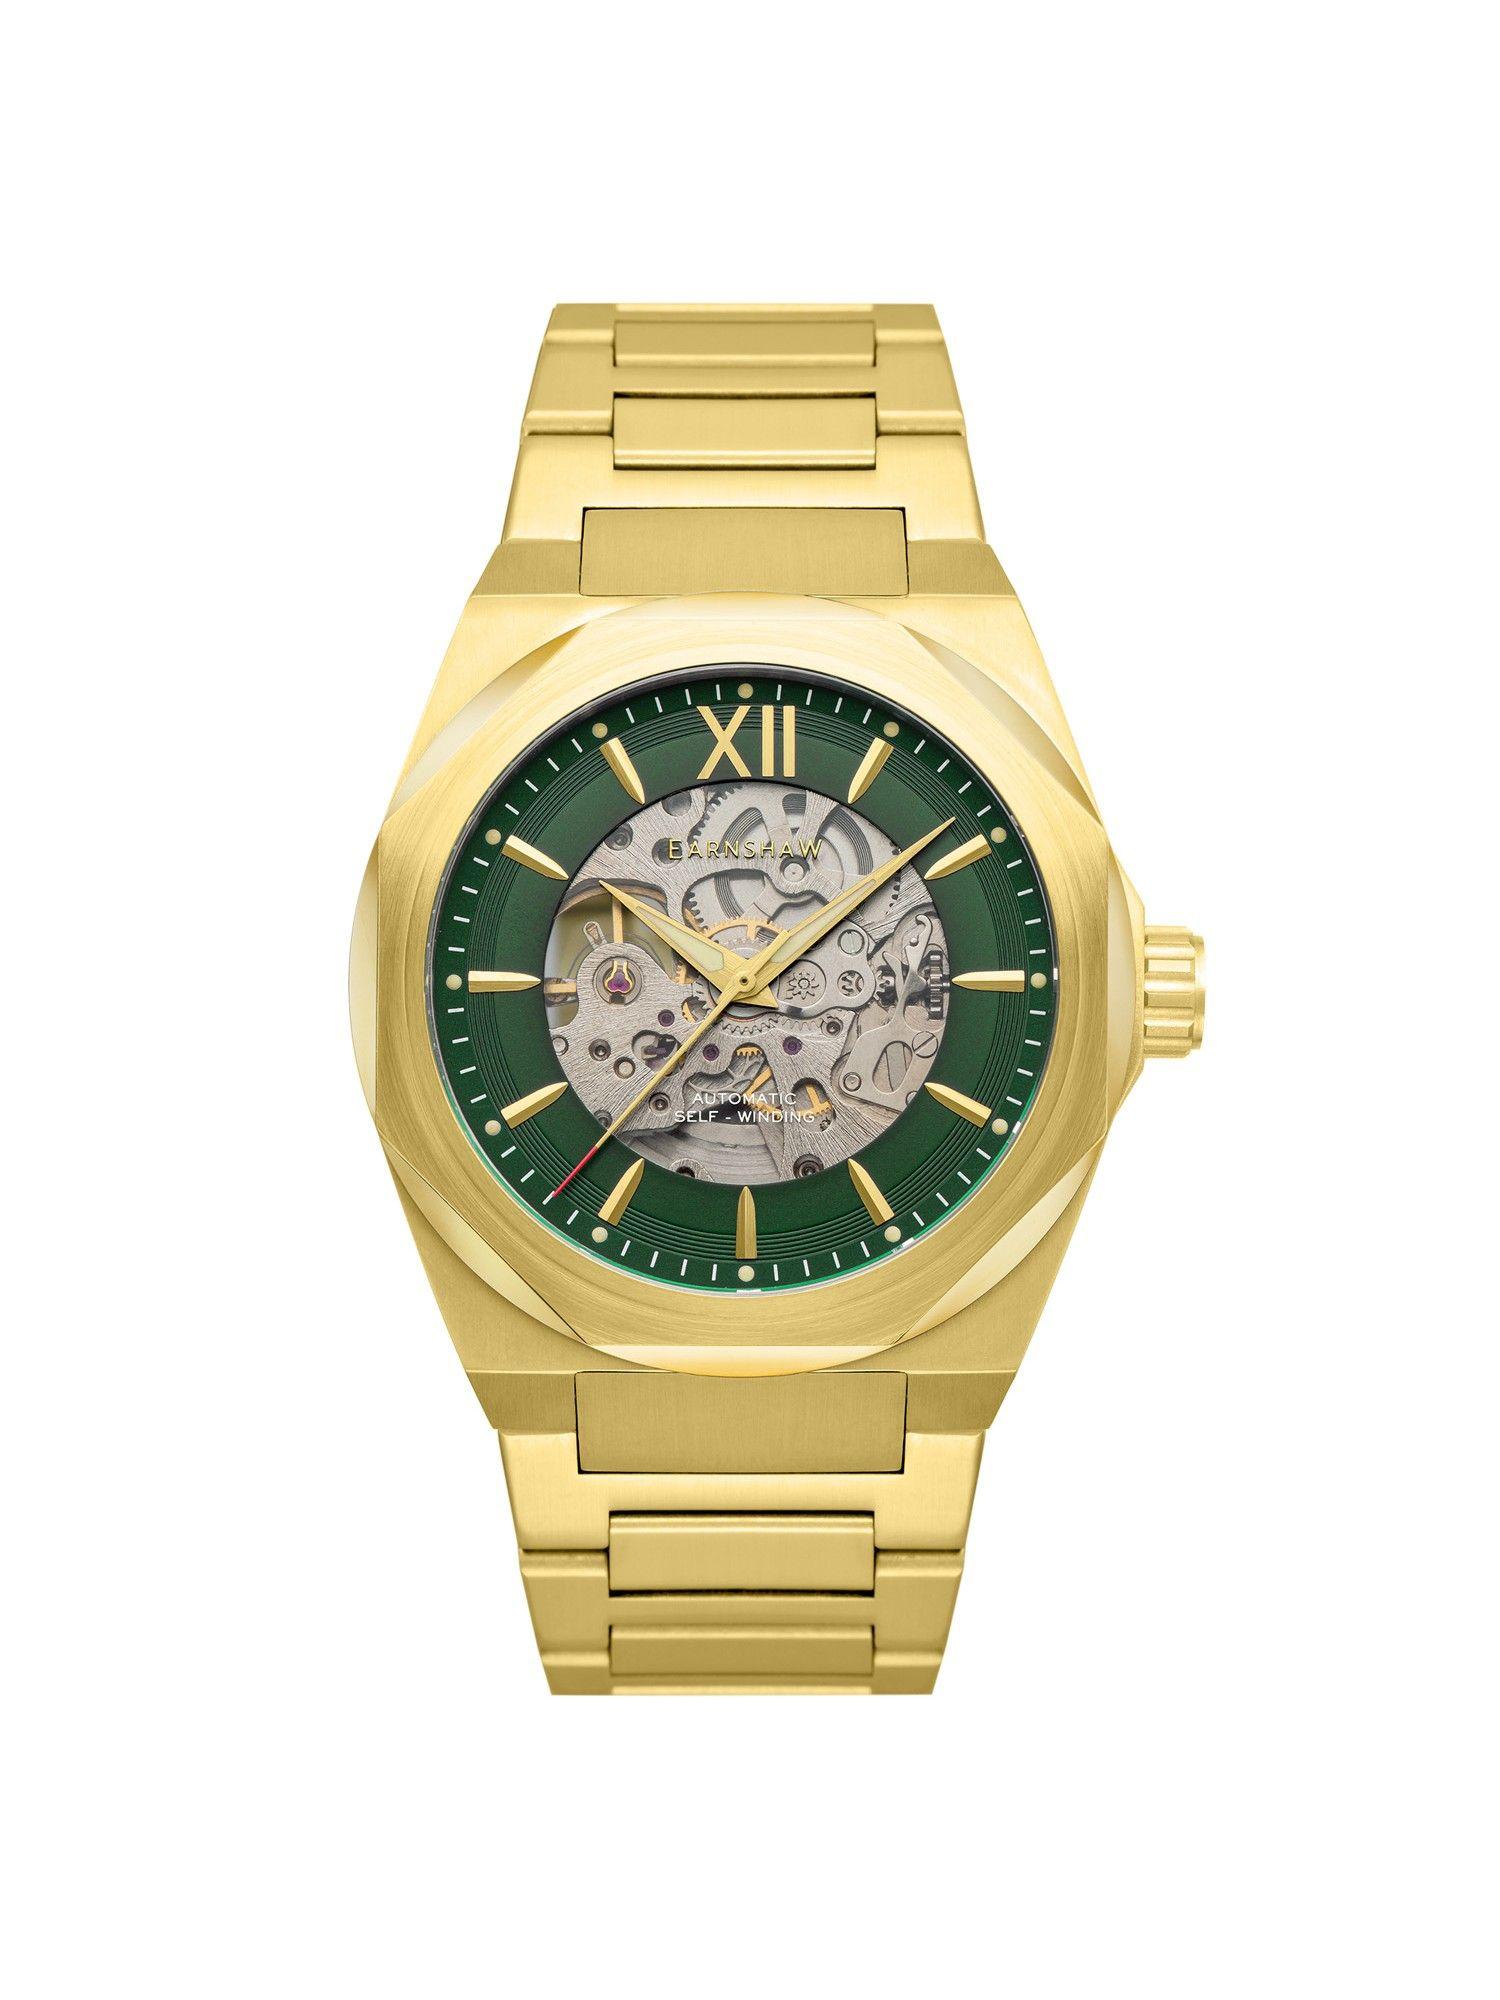 clark skeleton automatic green round dial mens watch - es-8183-99